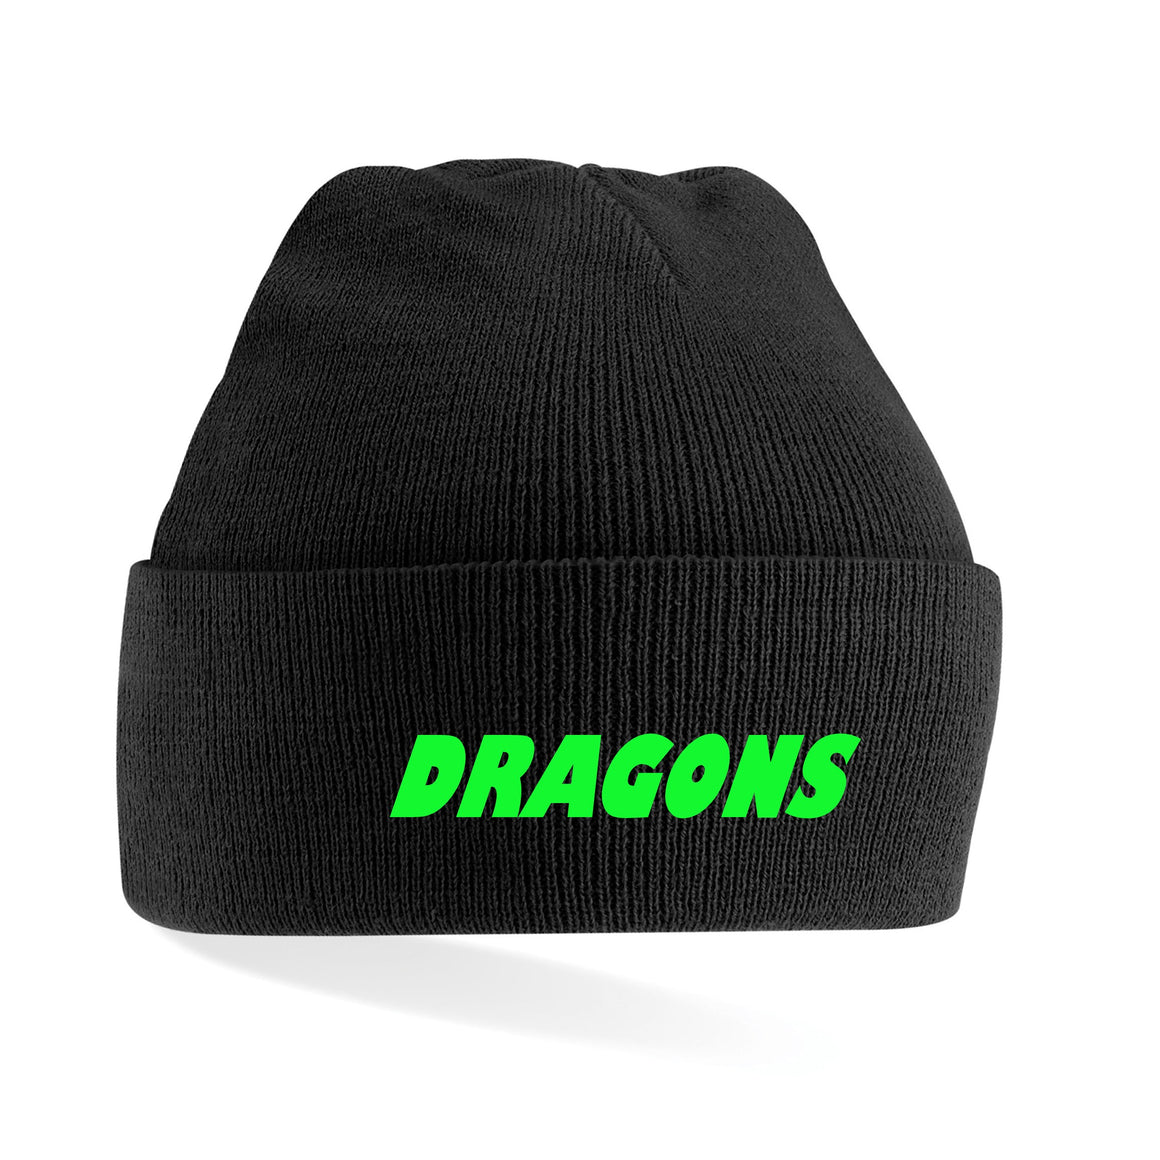 Dragons Beanie with Fold